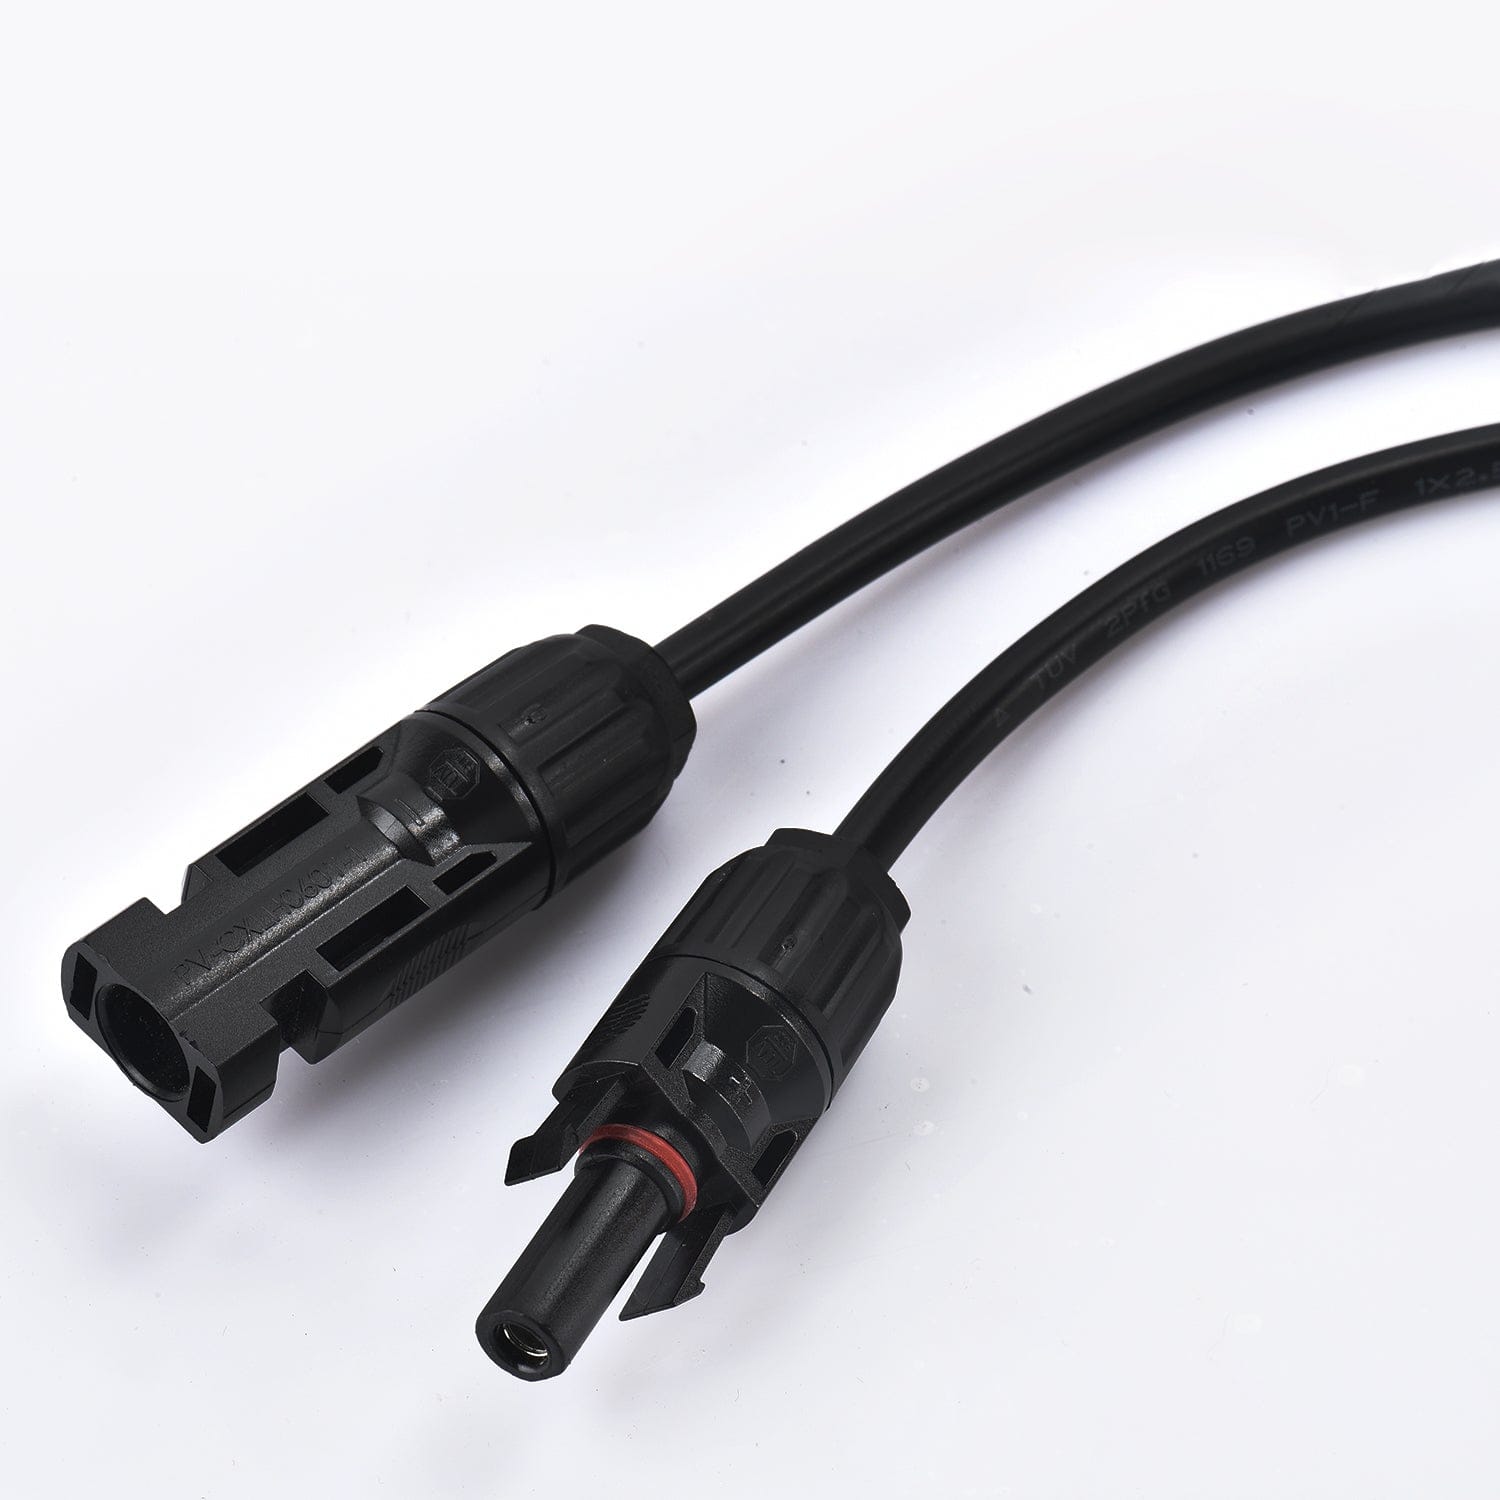 5 Foot Solar Panel Extension Cable